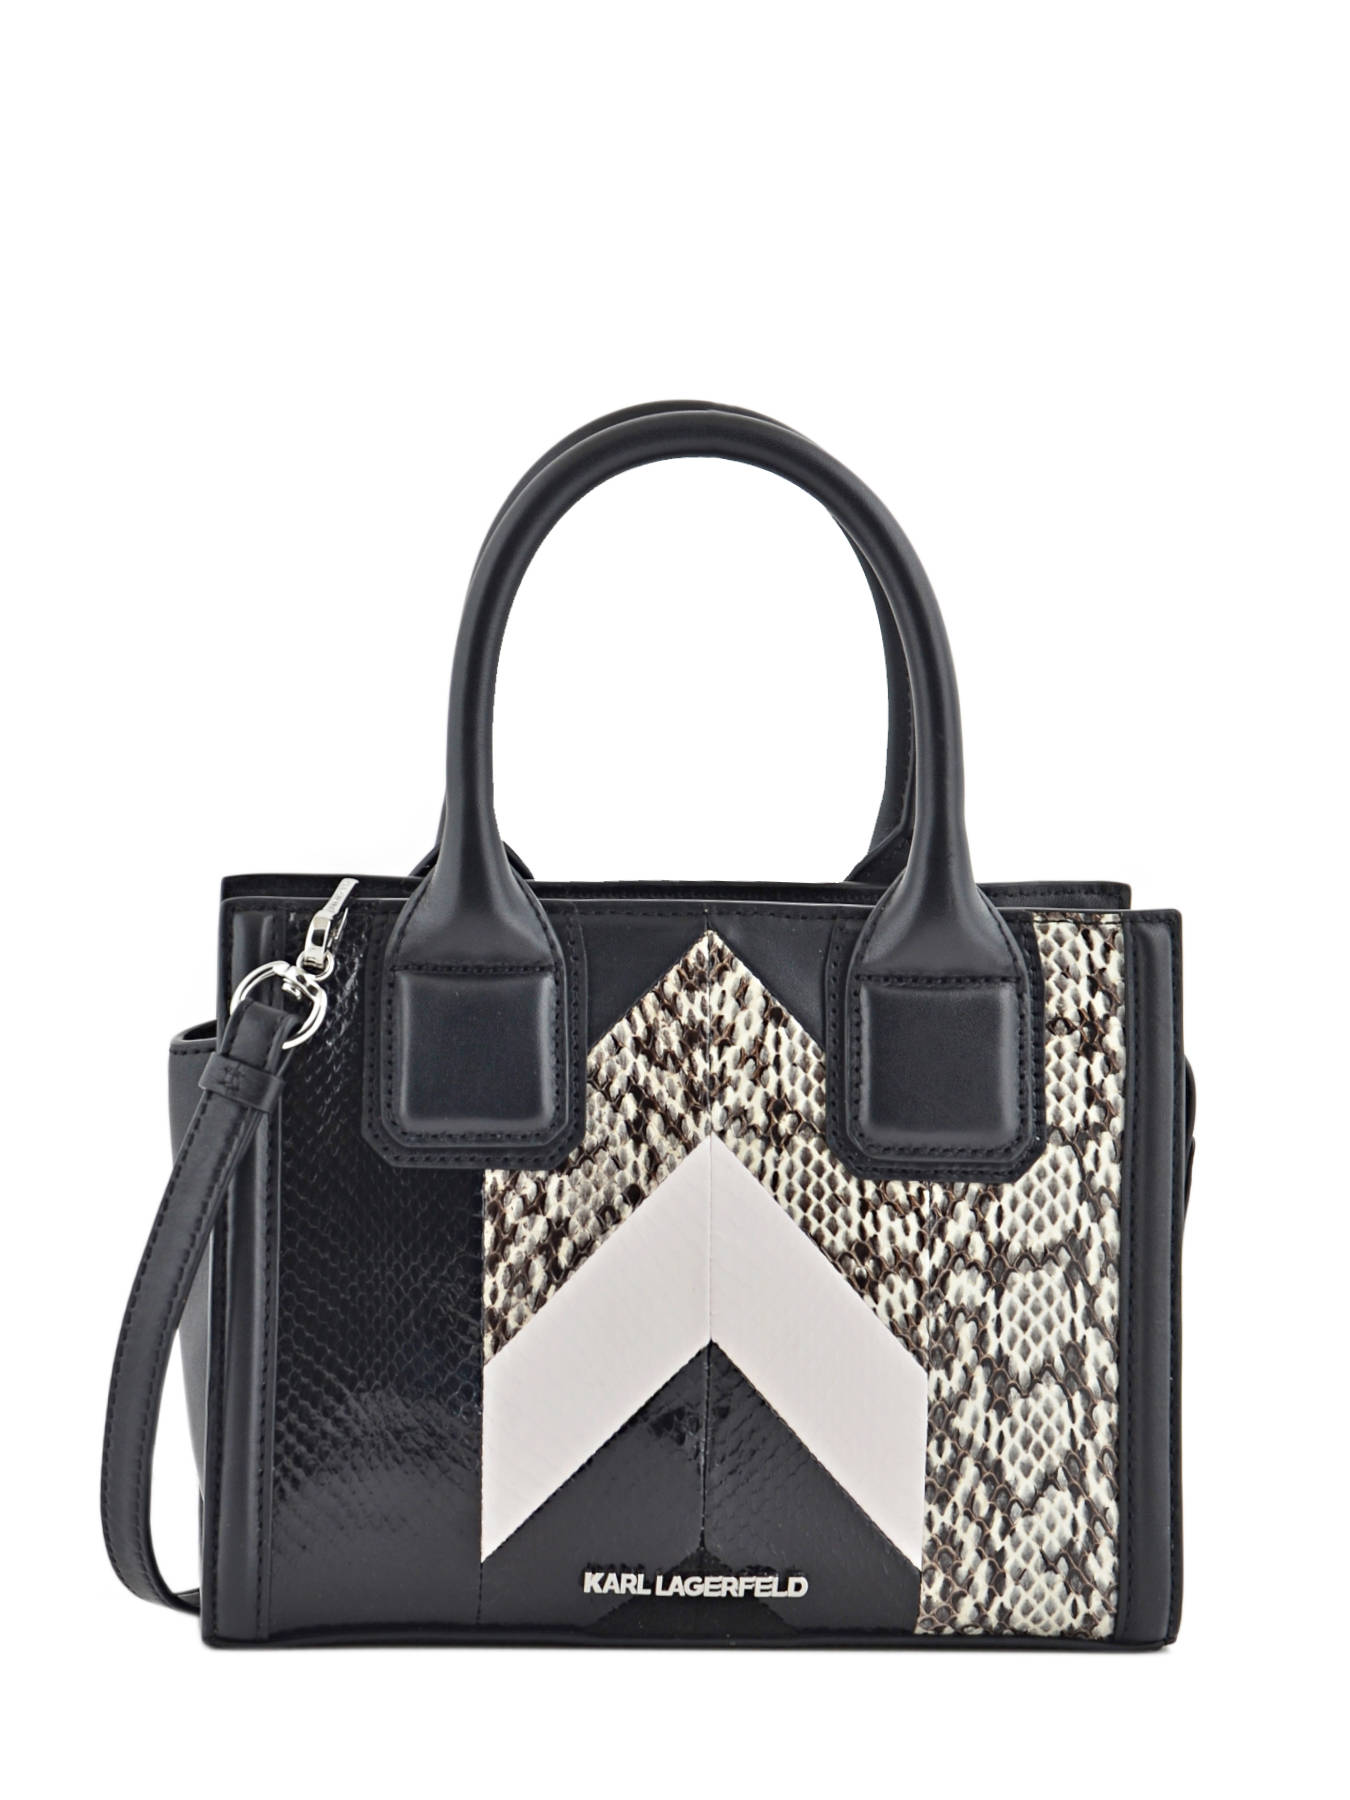 Karl Lagerfeld Tote 76KW3042 - free shipping available